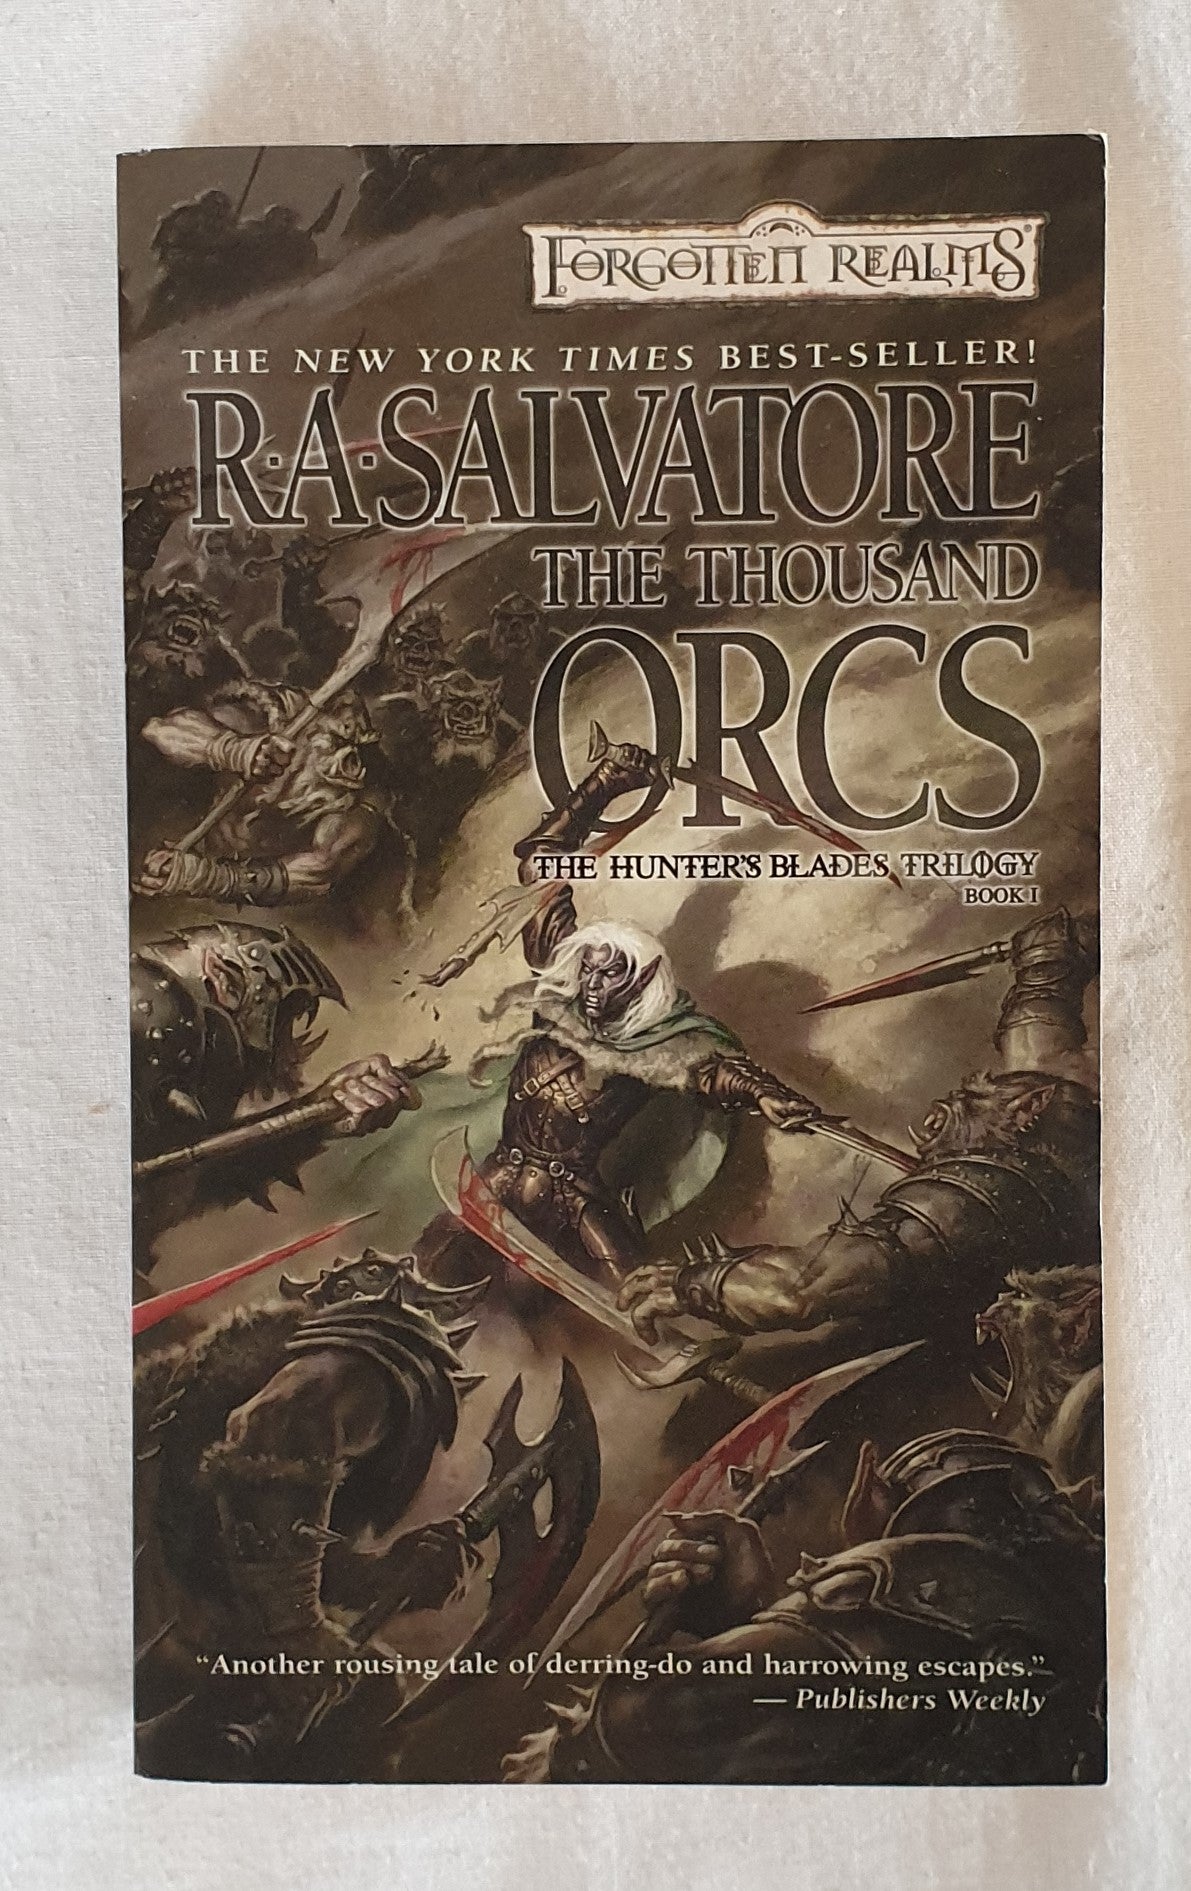 The Thousand Orcs by R. A. Salvatore